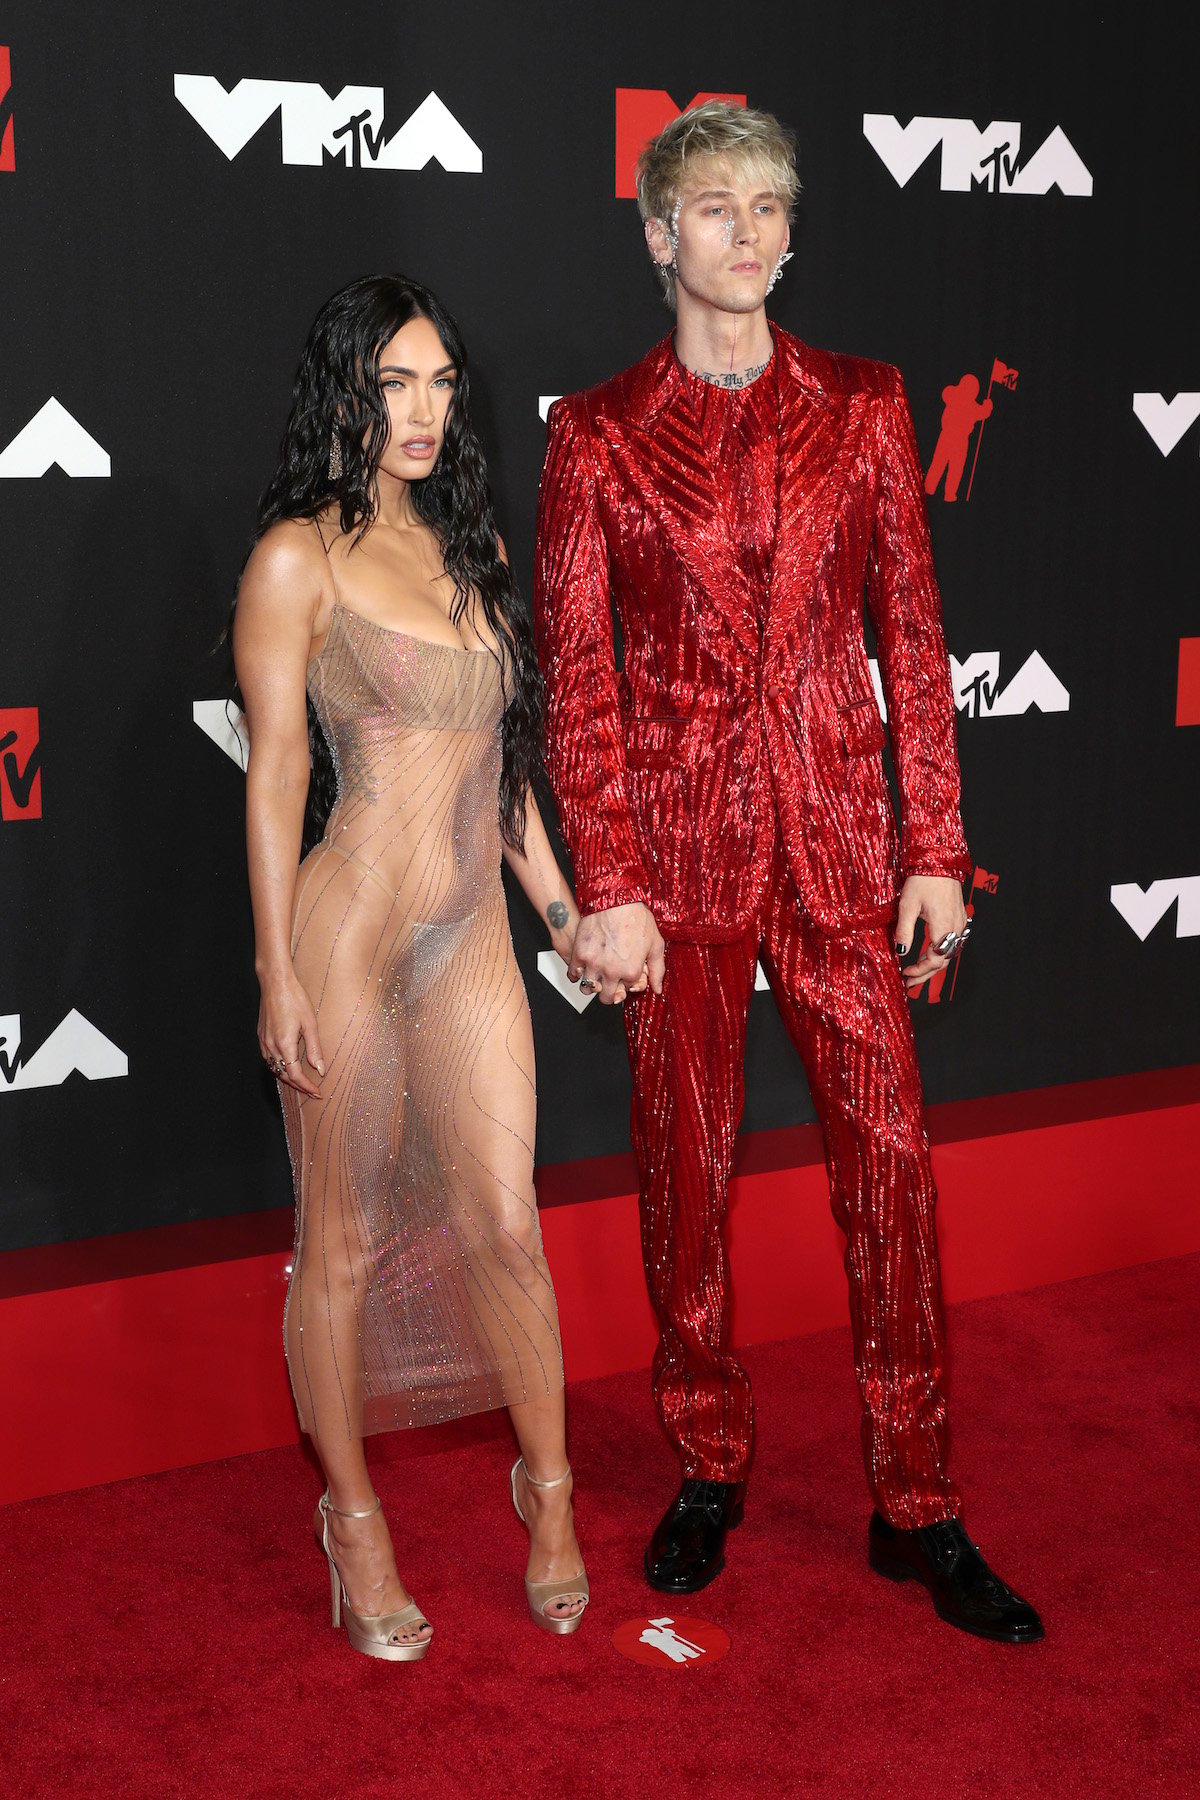 Megan Fox in a see-through dress and Machine Gun Kelly in a red sequined suit at the 2021 VMAs.